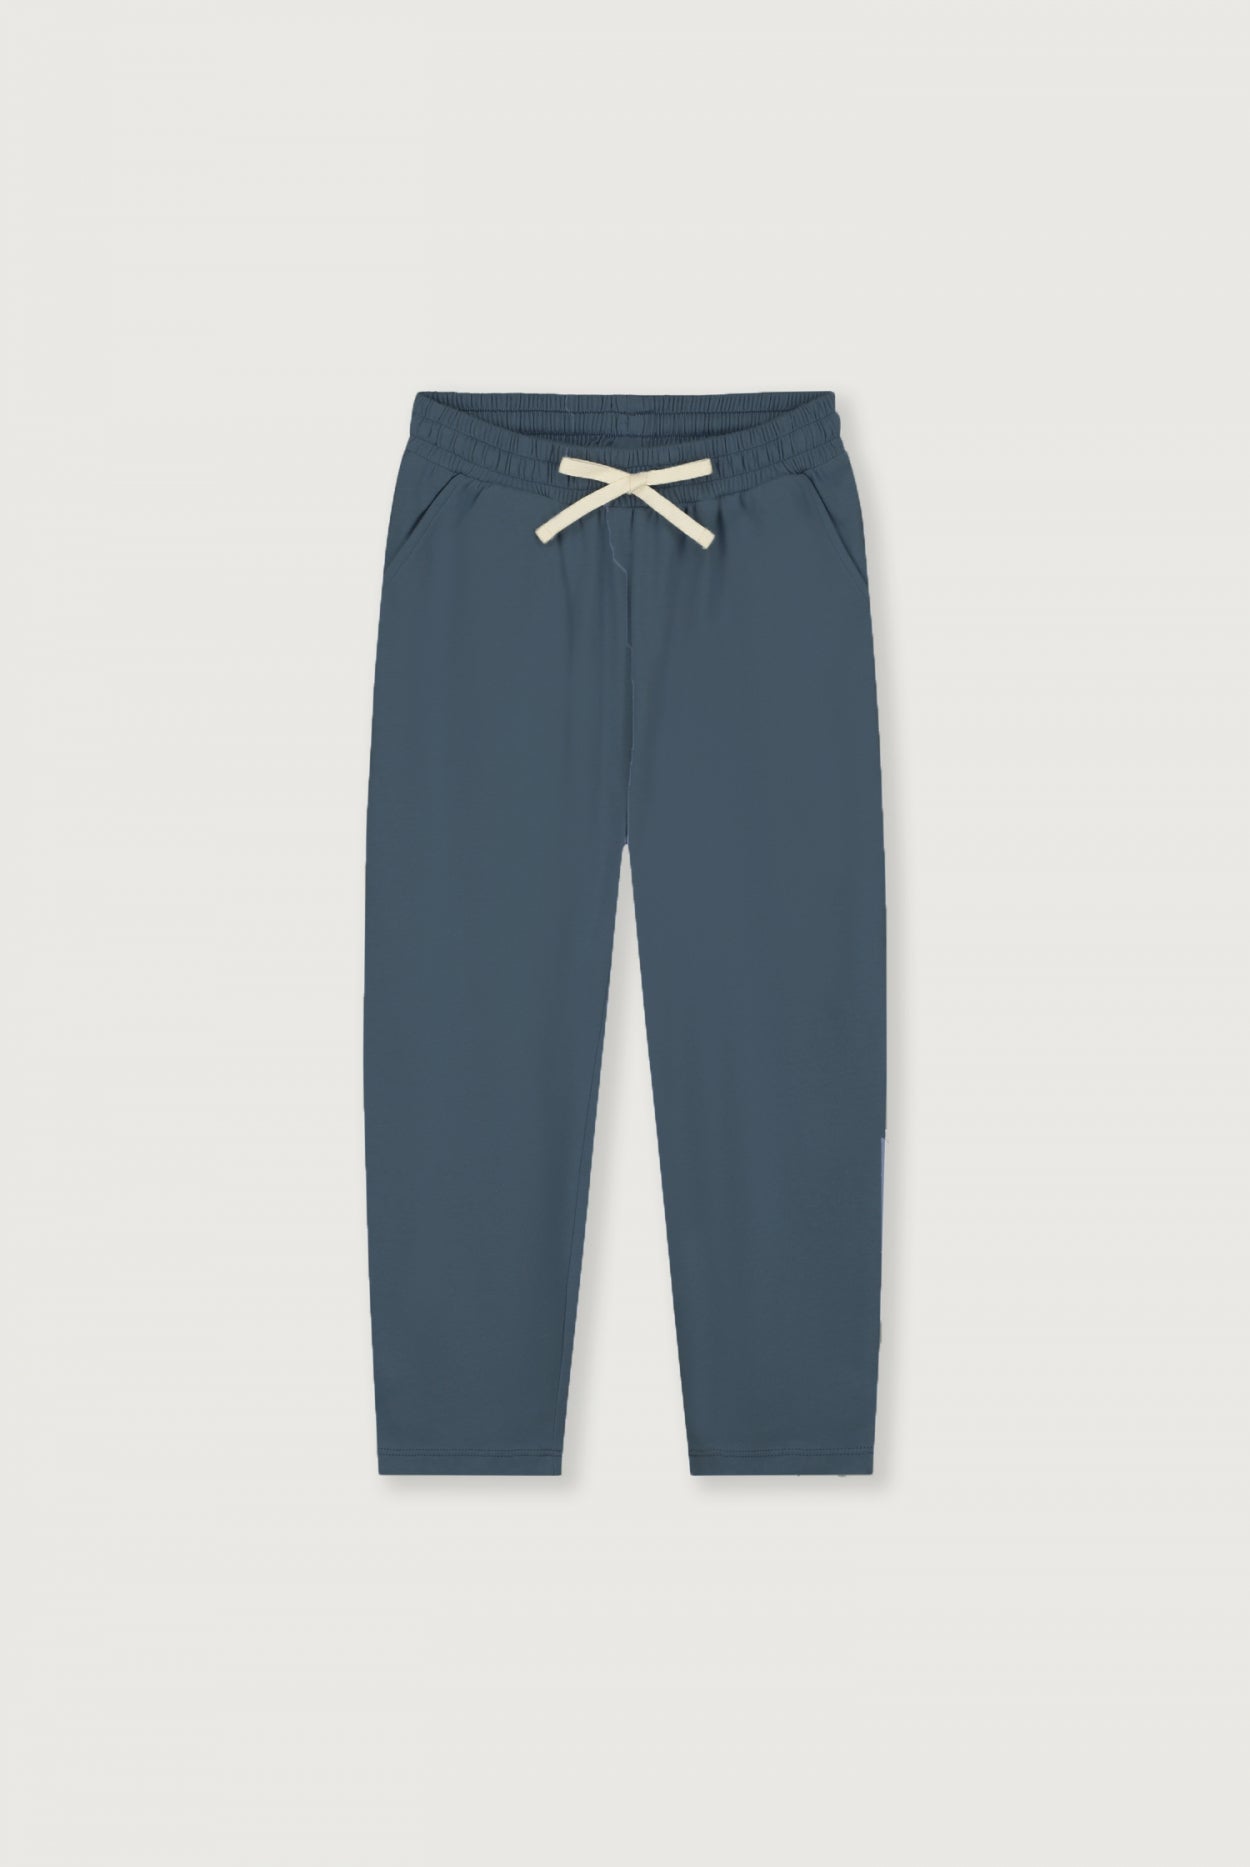 Tapered Pants | Blue Grey